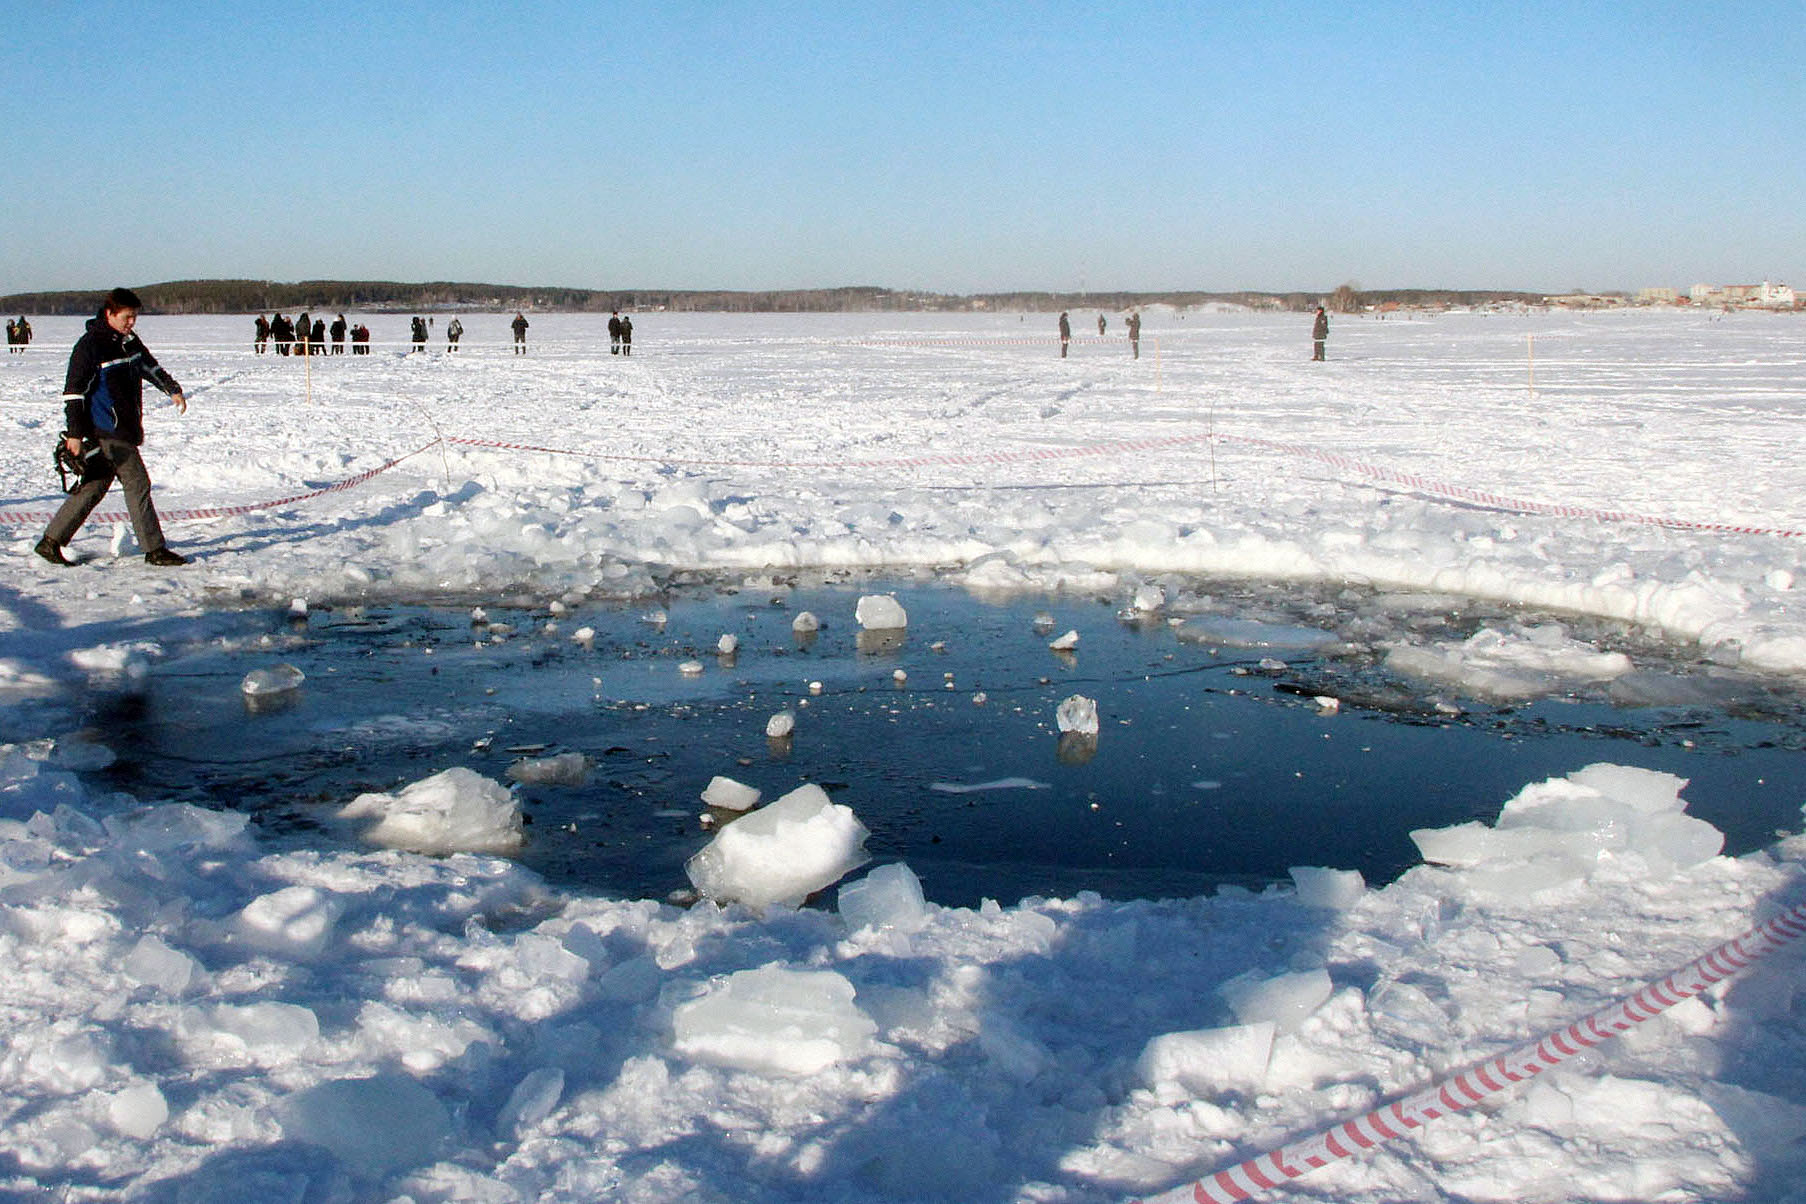 A hole on the ice of Chebarkul Lake in the Russian region of Chelyabinsk, believed to have been made by a meteor fragment, is shown on Feb. 16, 2013.